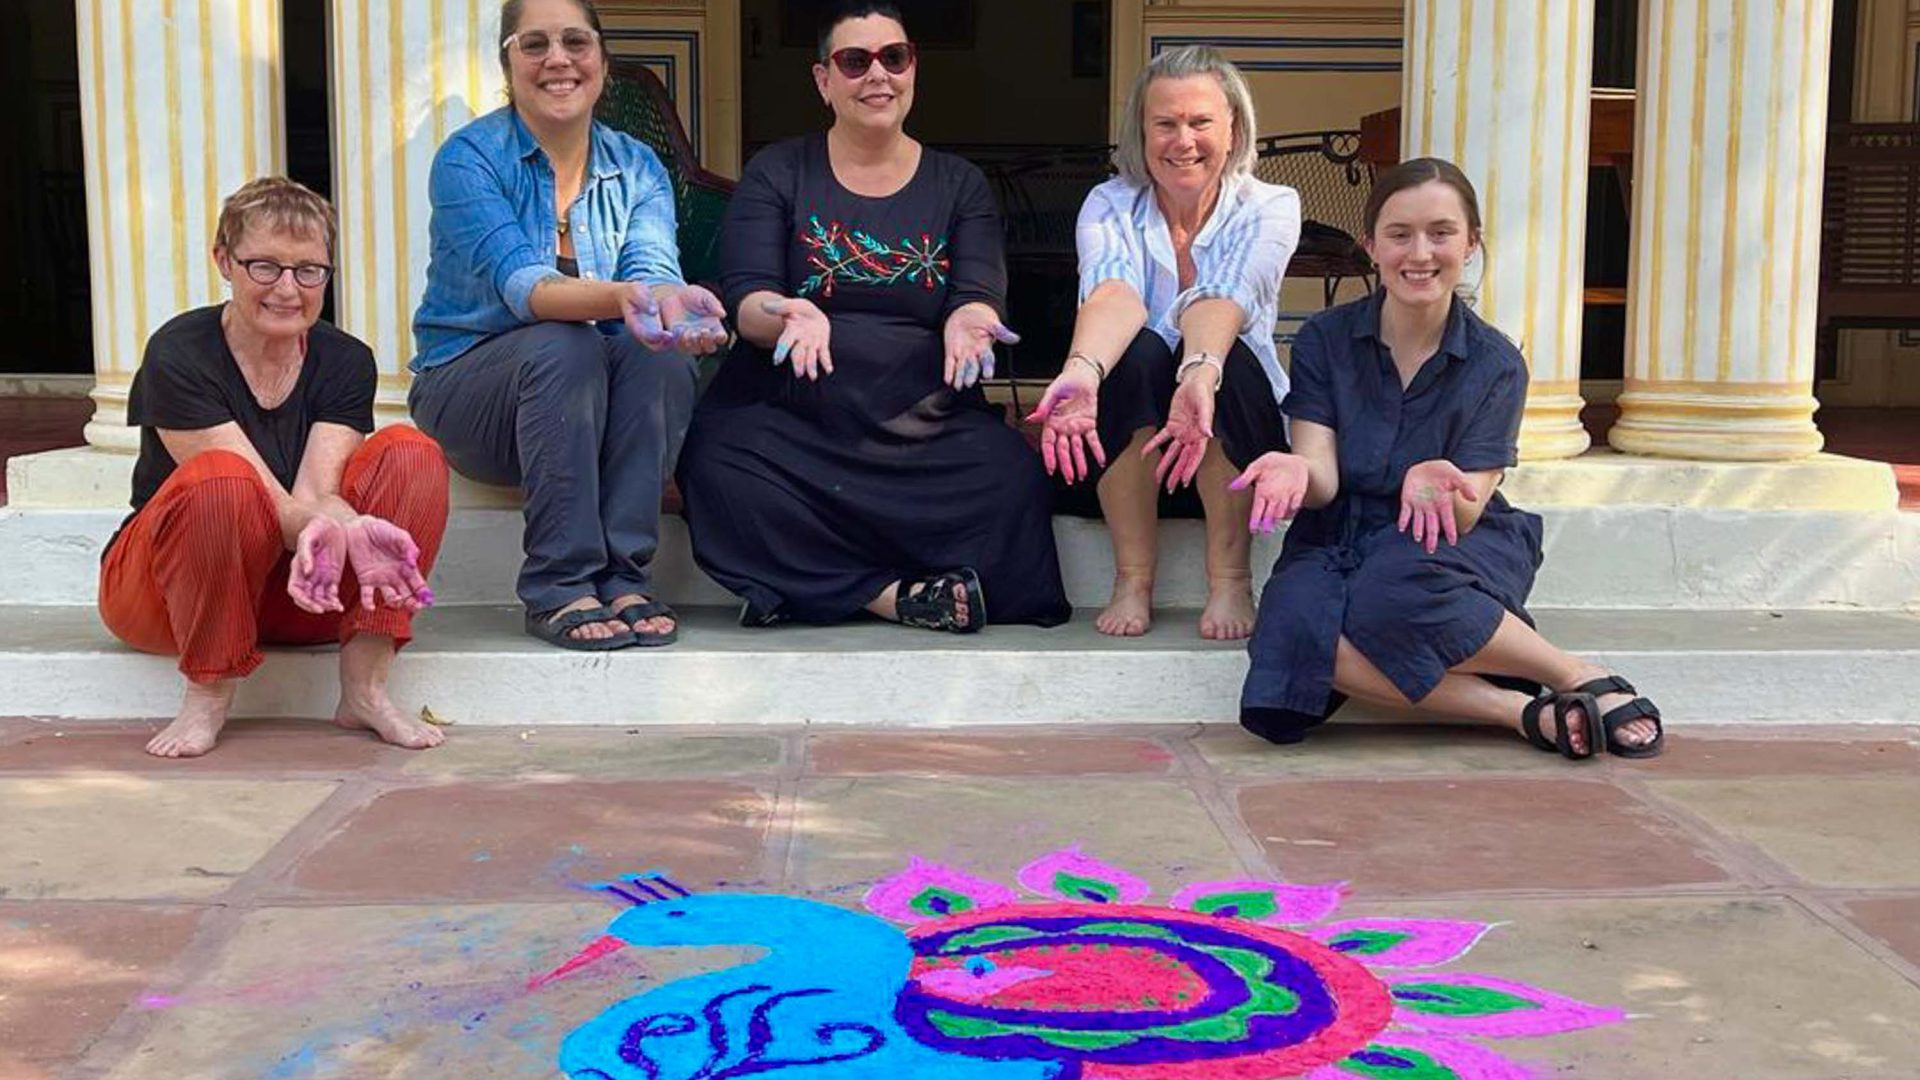 The group smile for a photo in front of a rangoli during Diwali.